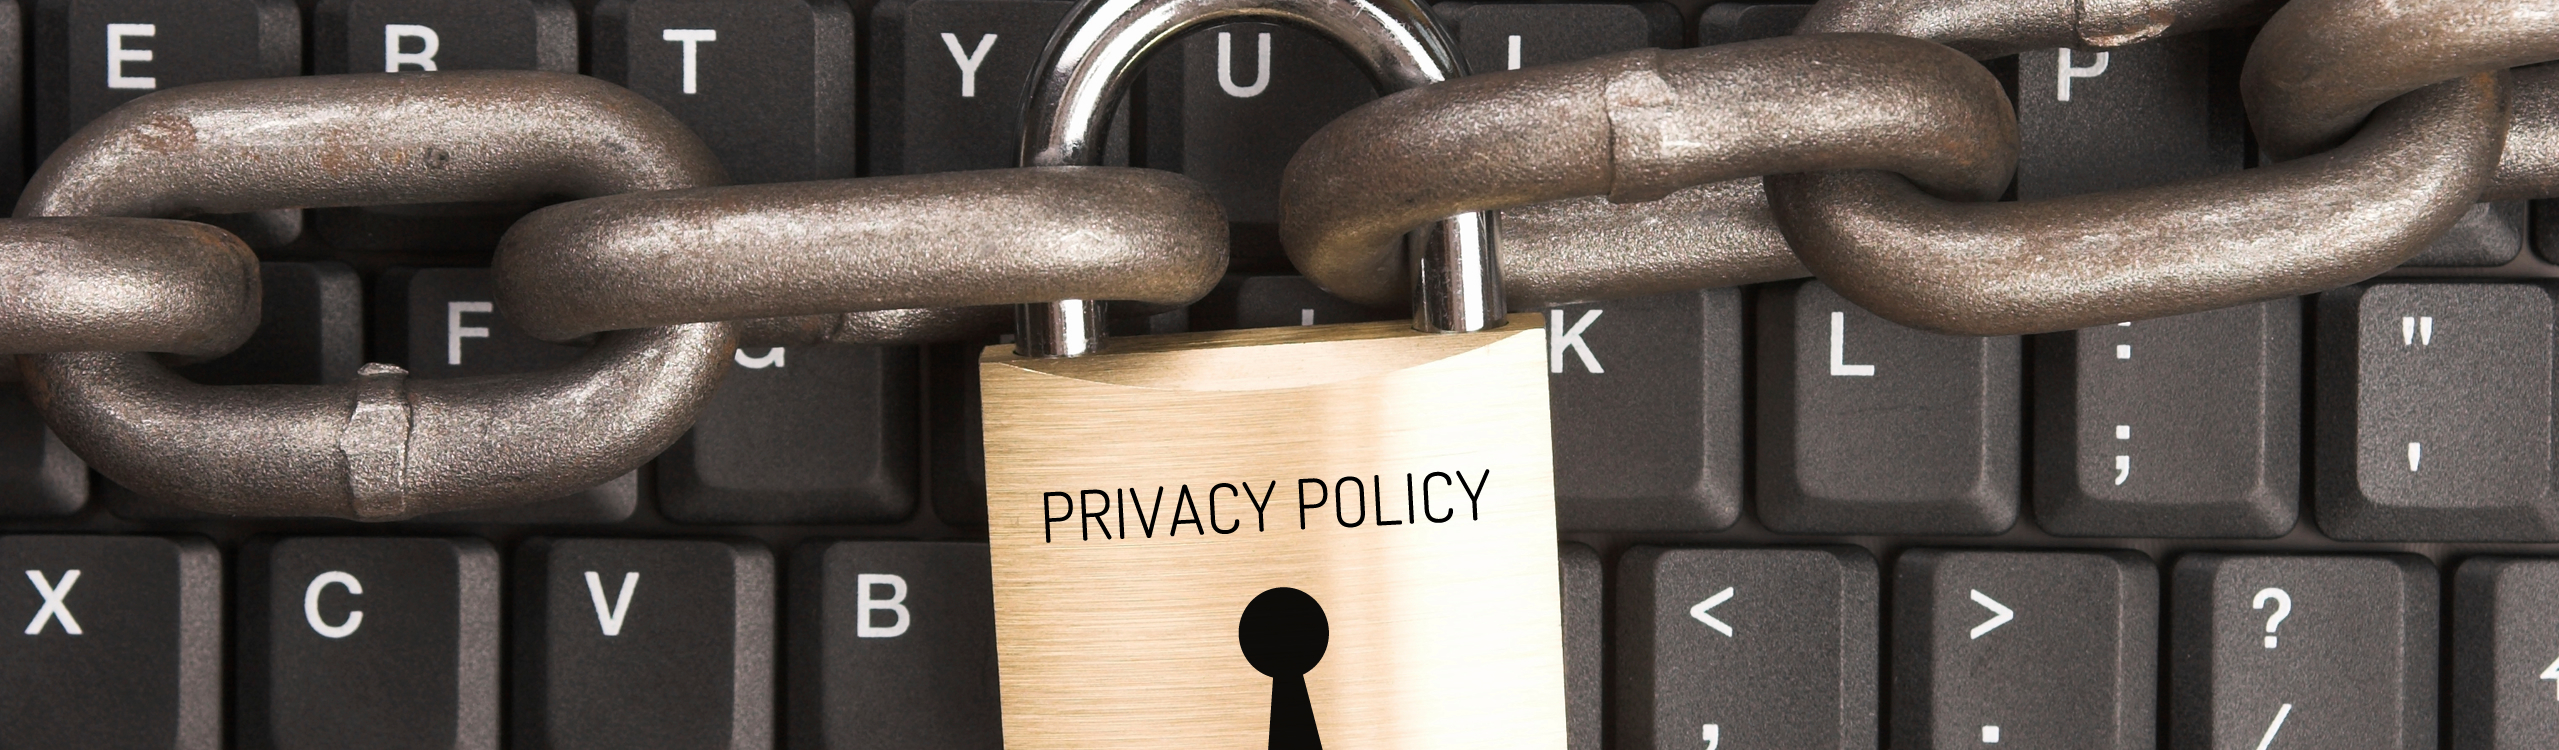 STPL Privacy Policy